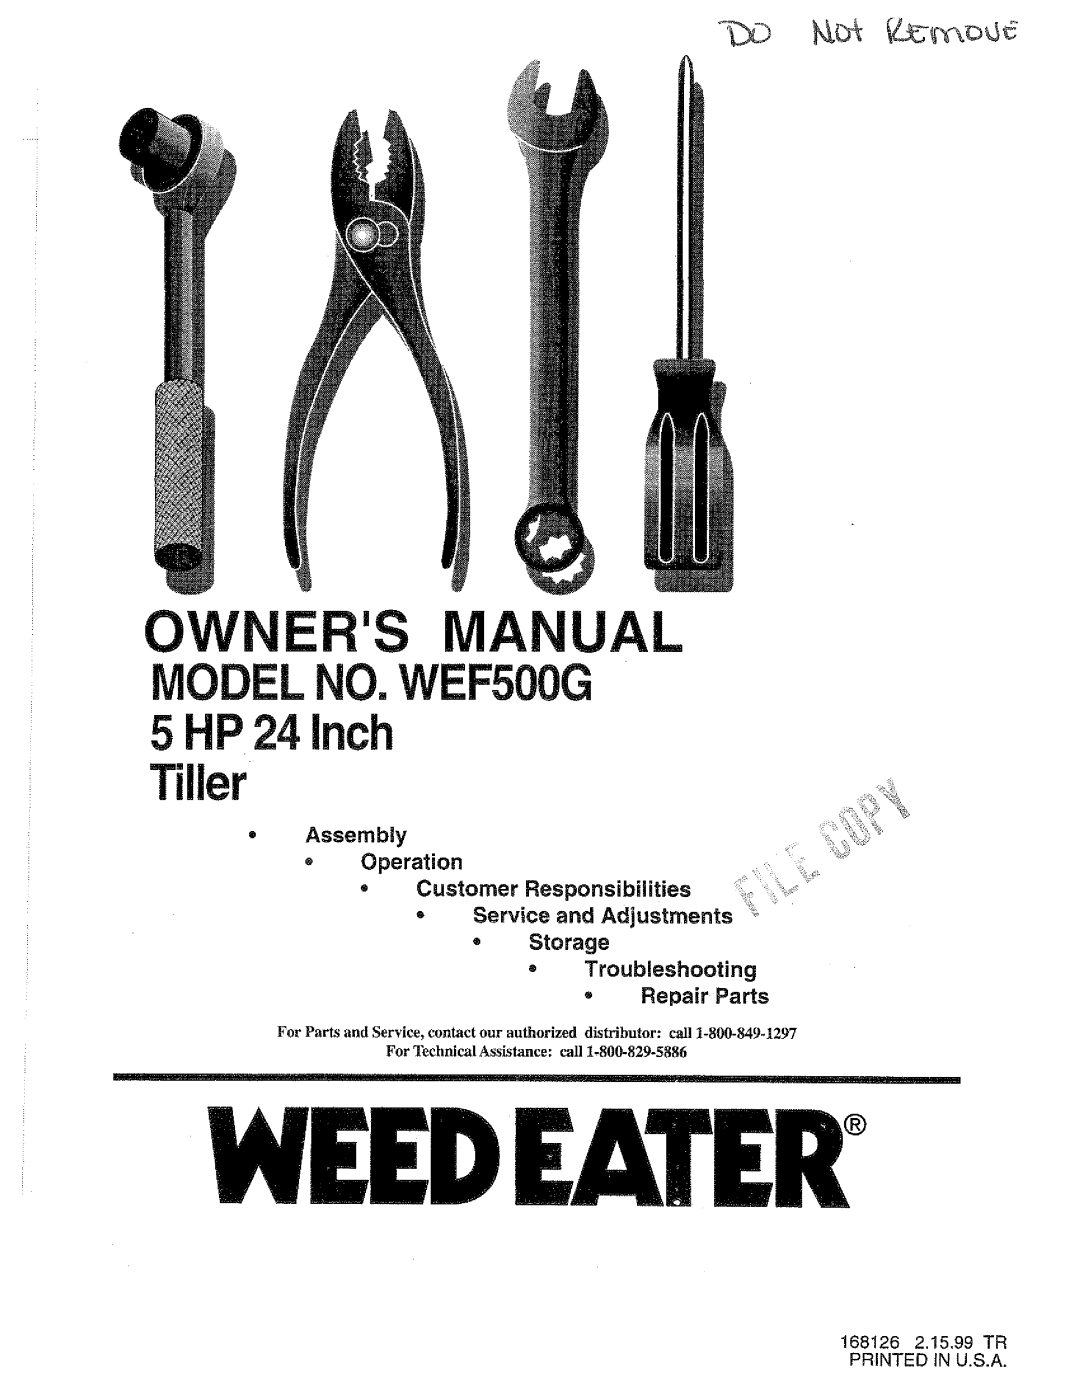 Weed Eater 168126, WEF500G manual 